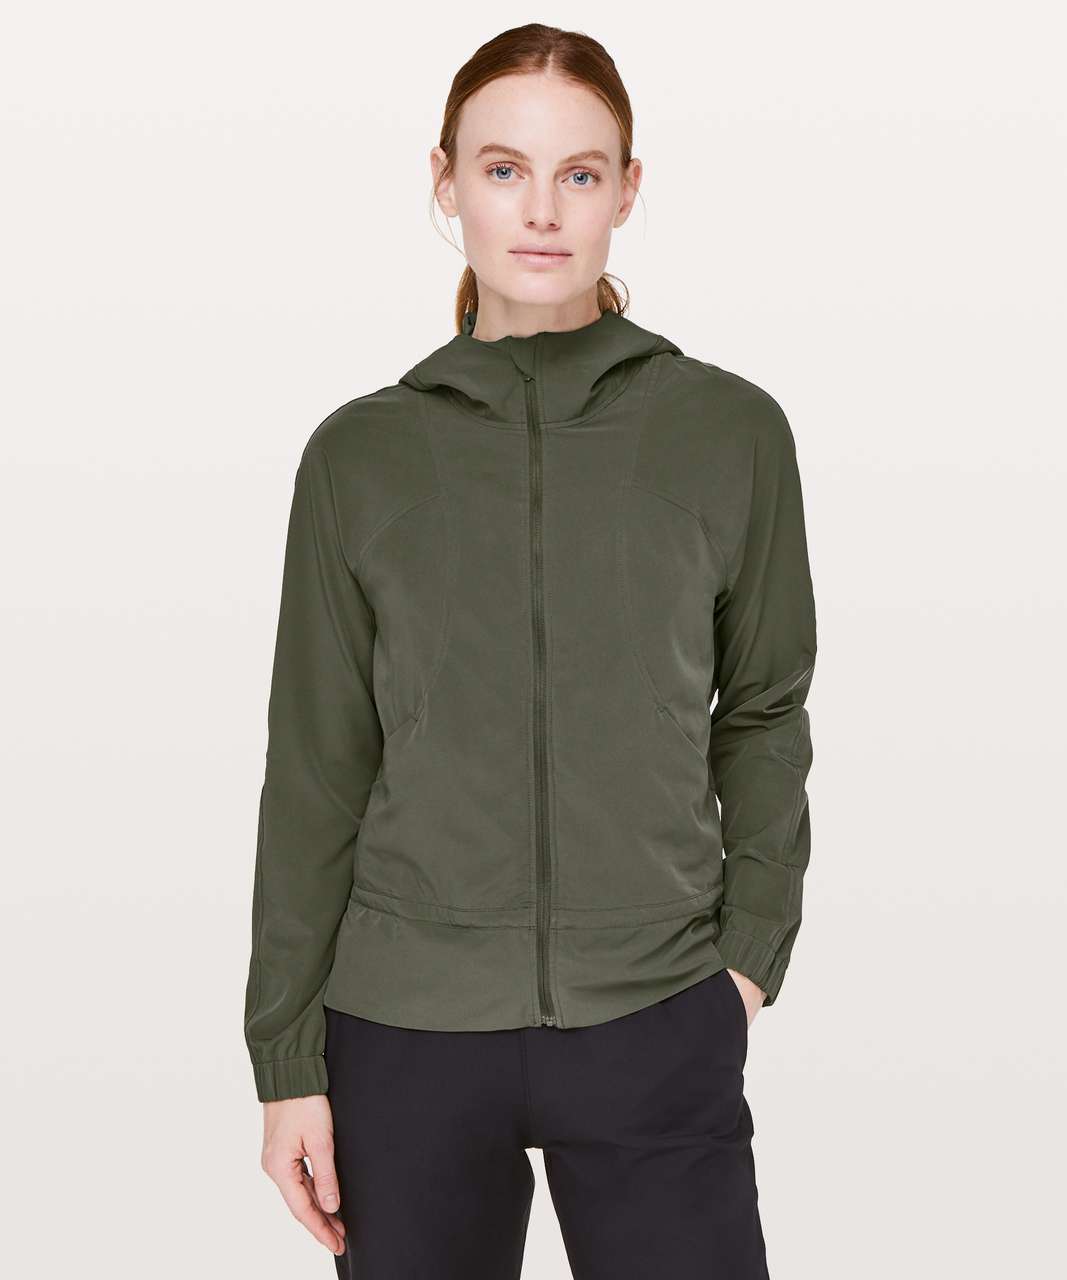 lululemon pack it up jacket review